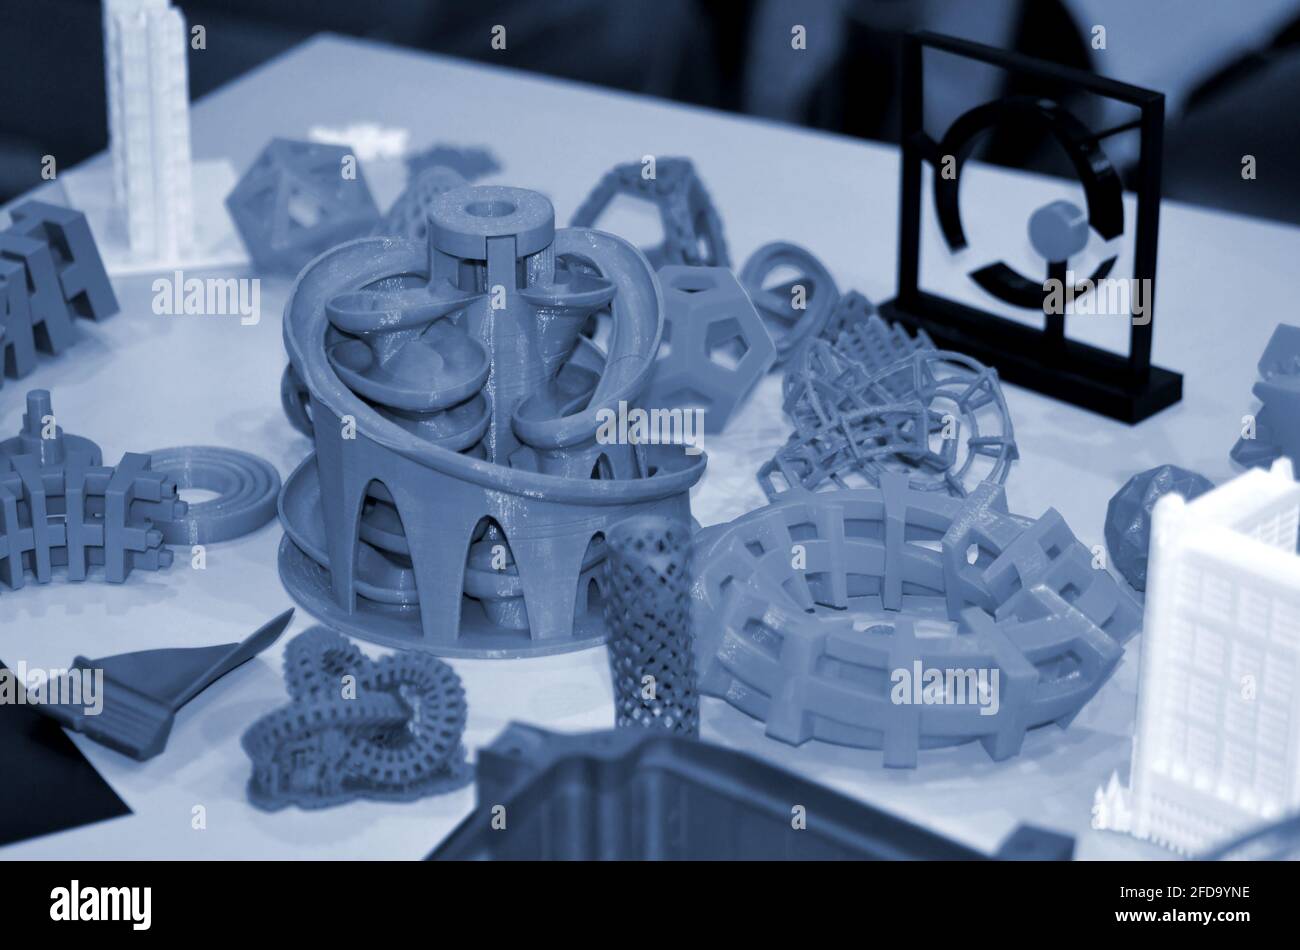 Forms printed by 3d printer. Objects printed on a 3d printer on a table. Stock Photo